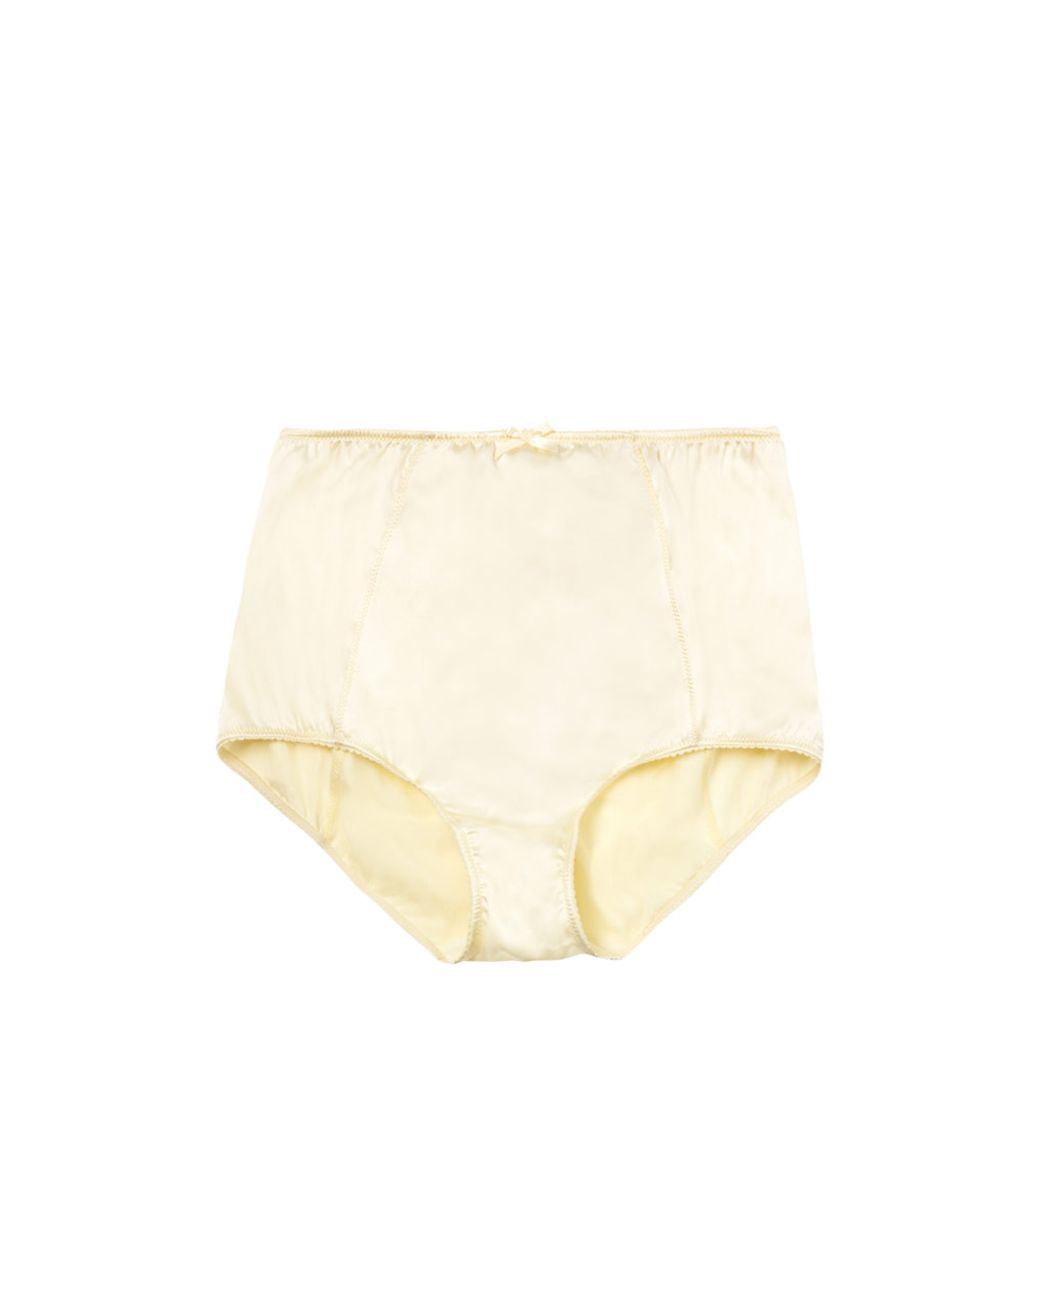 Dolce & Gabbana Satin High Waisted Knickers in Yellow | Lyst